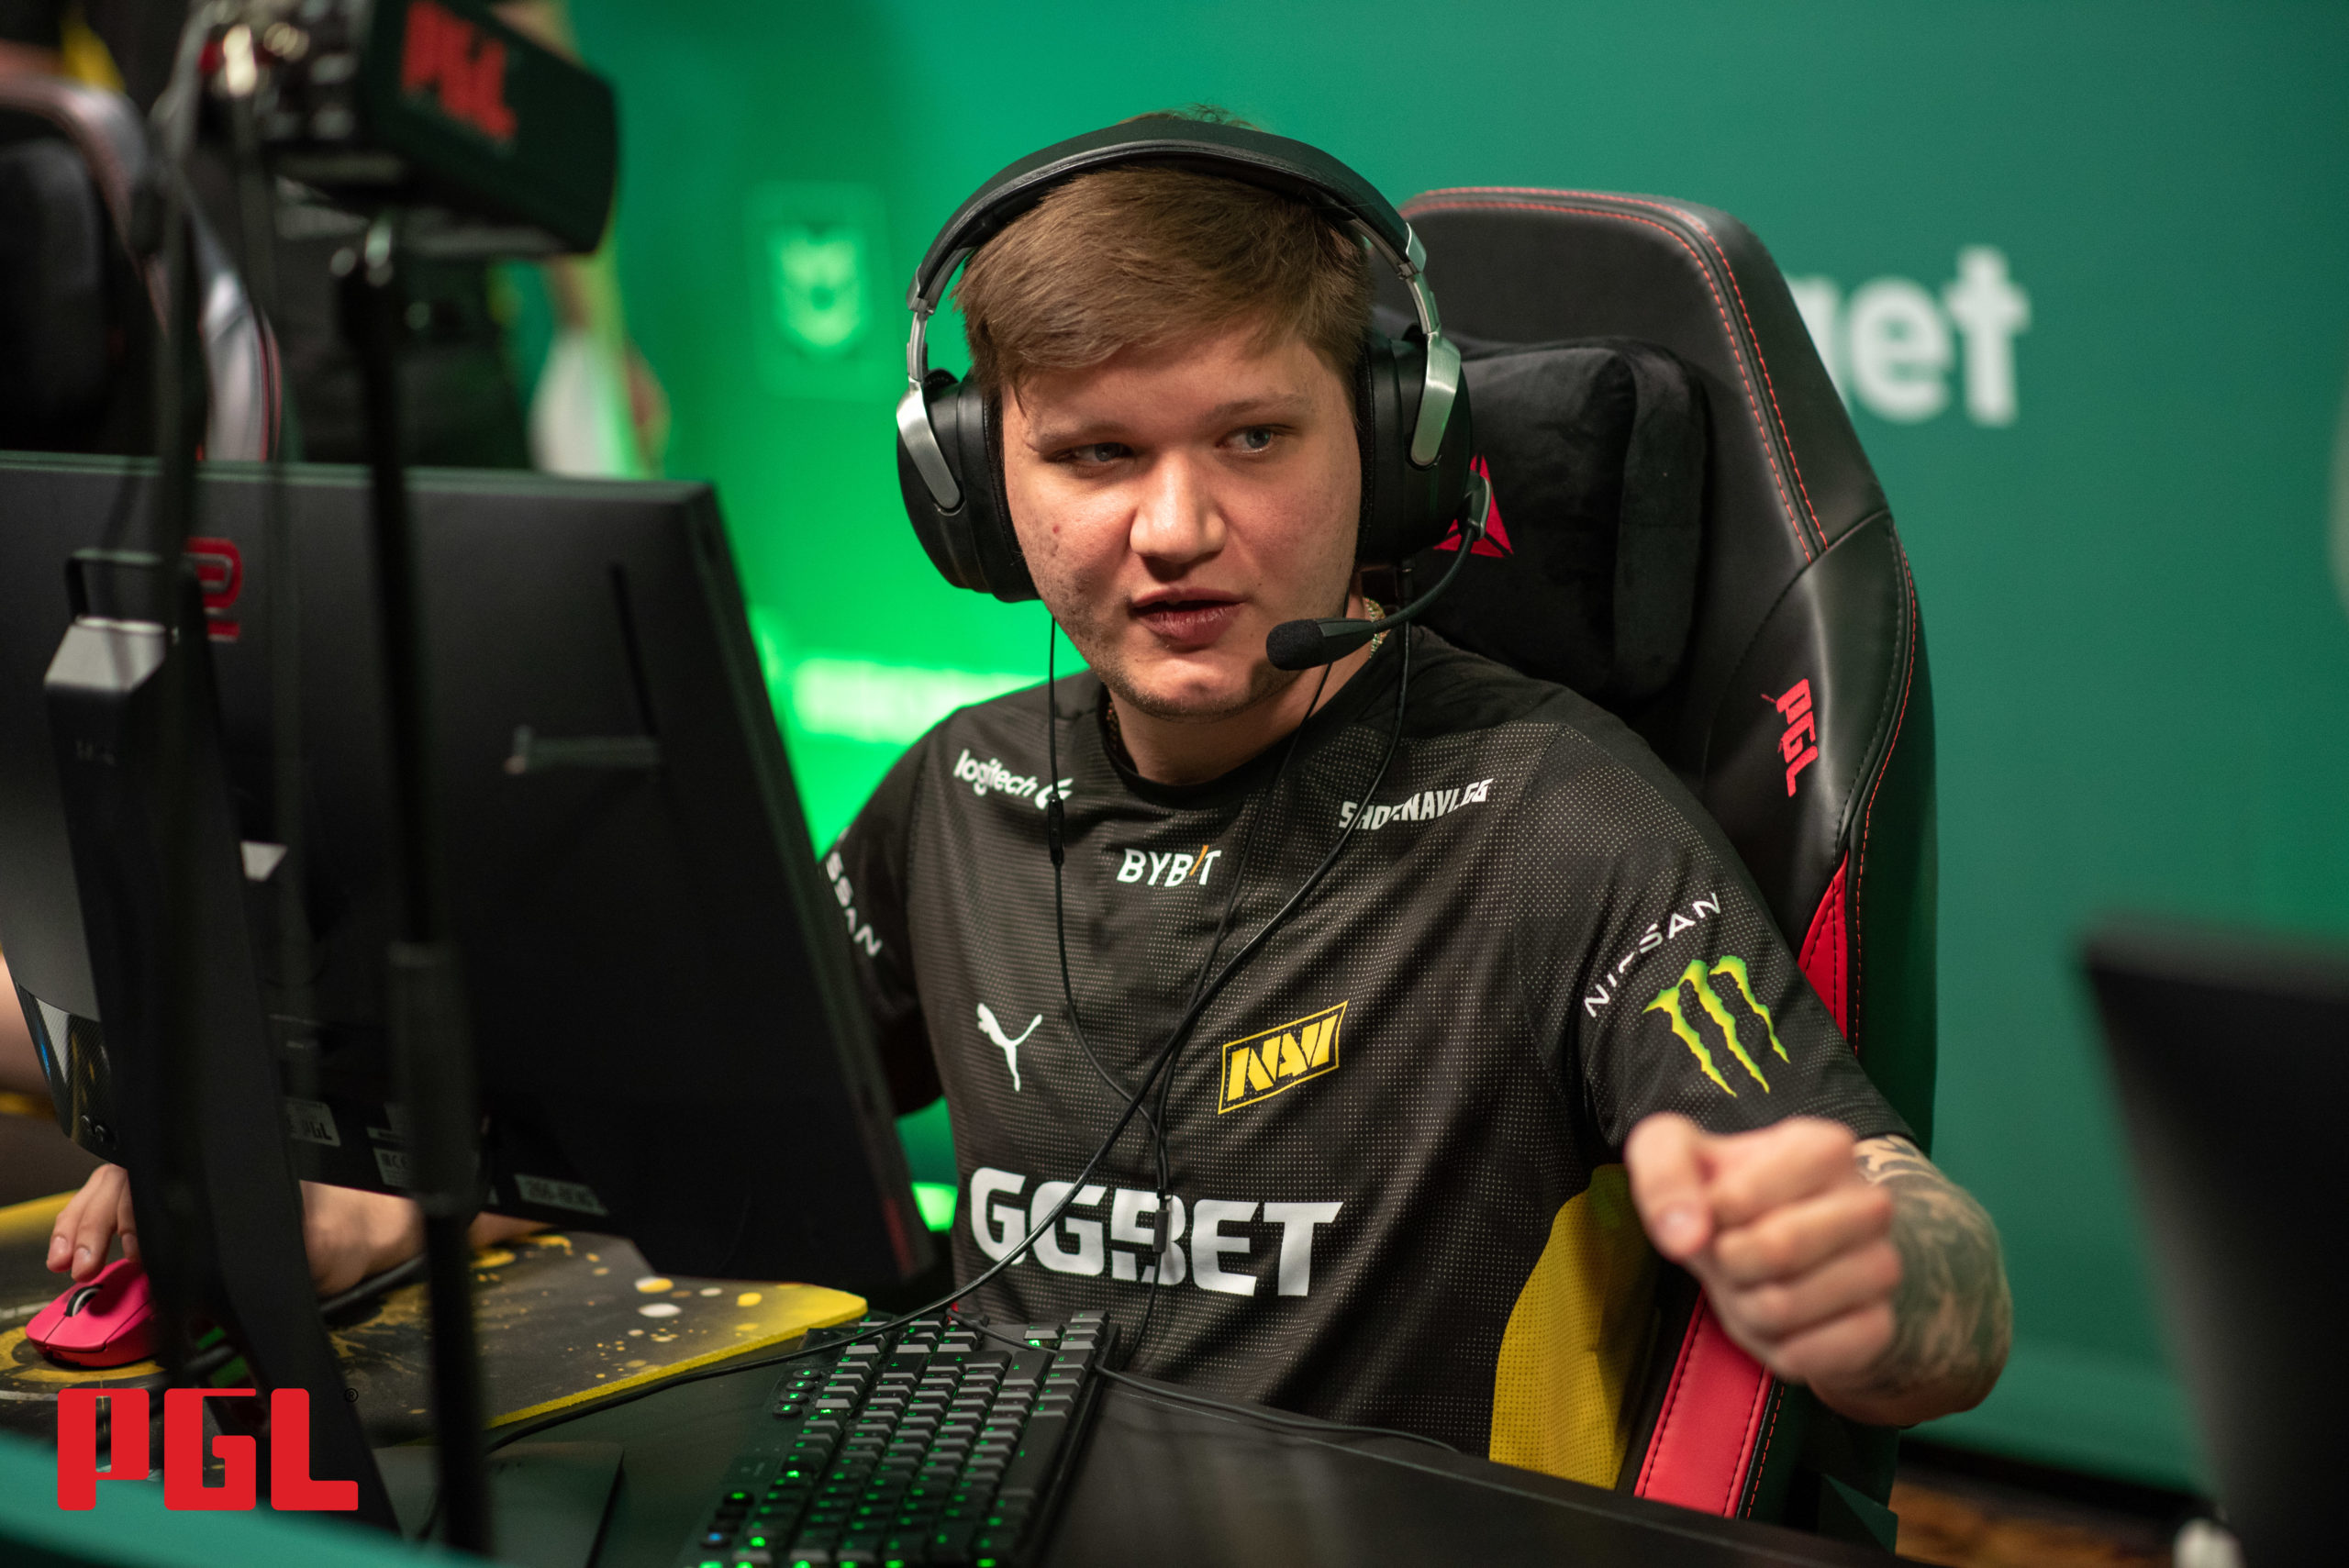 NaVi proceed to the Major